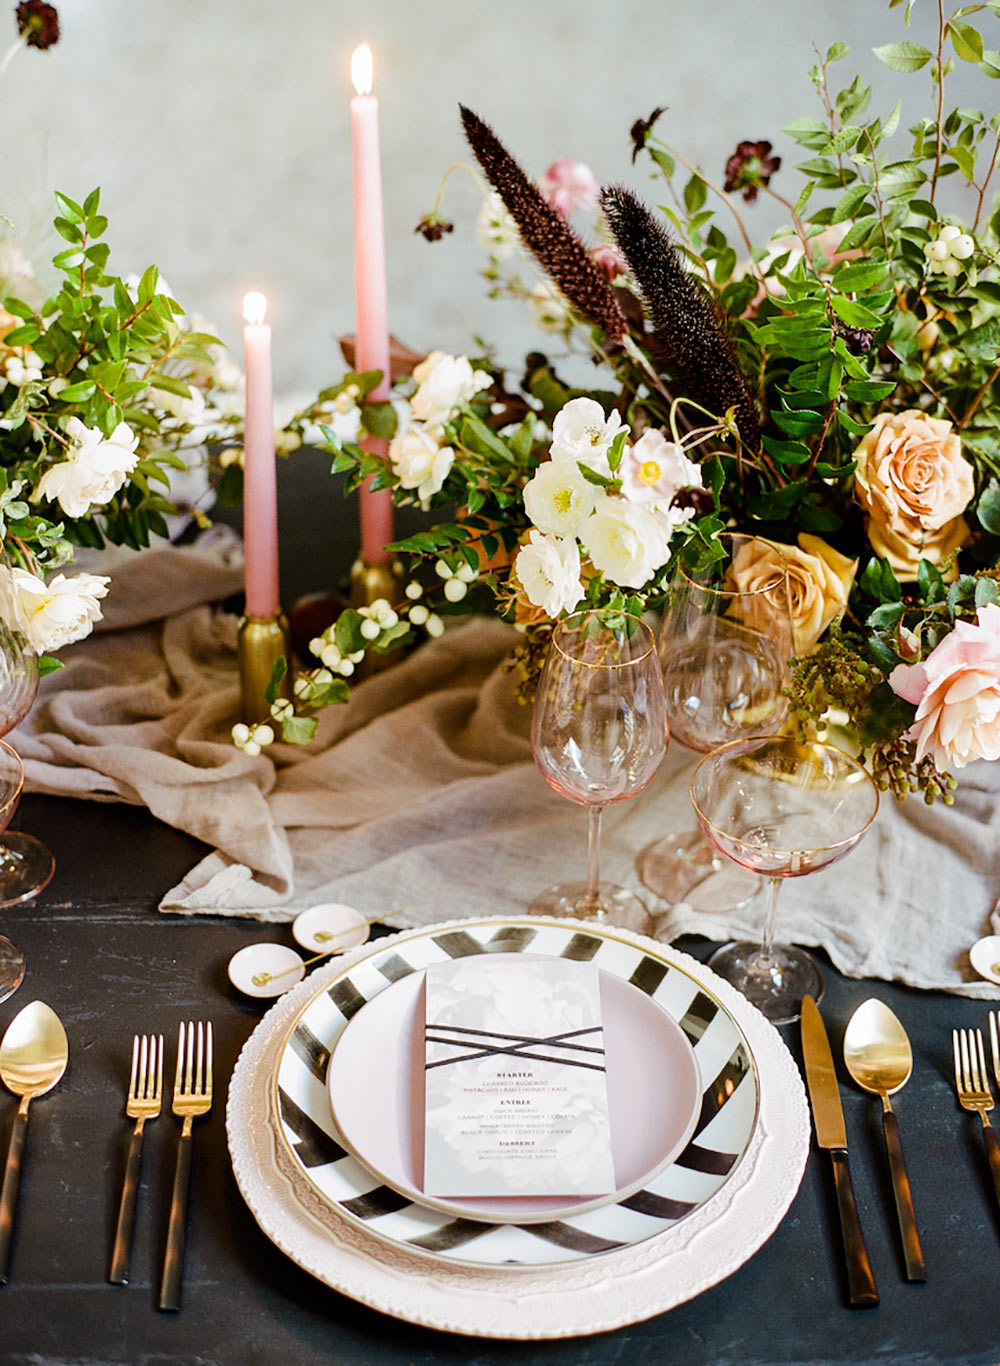 Here’s how to properly set and style a table